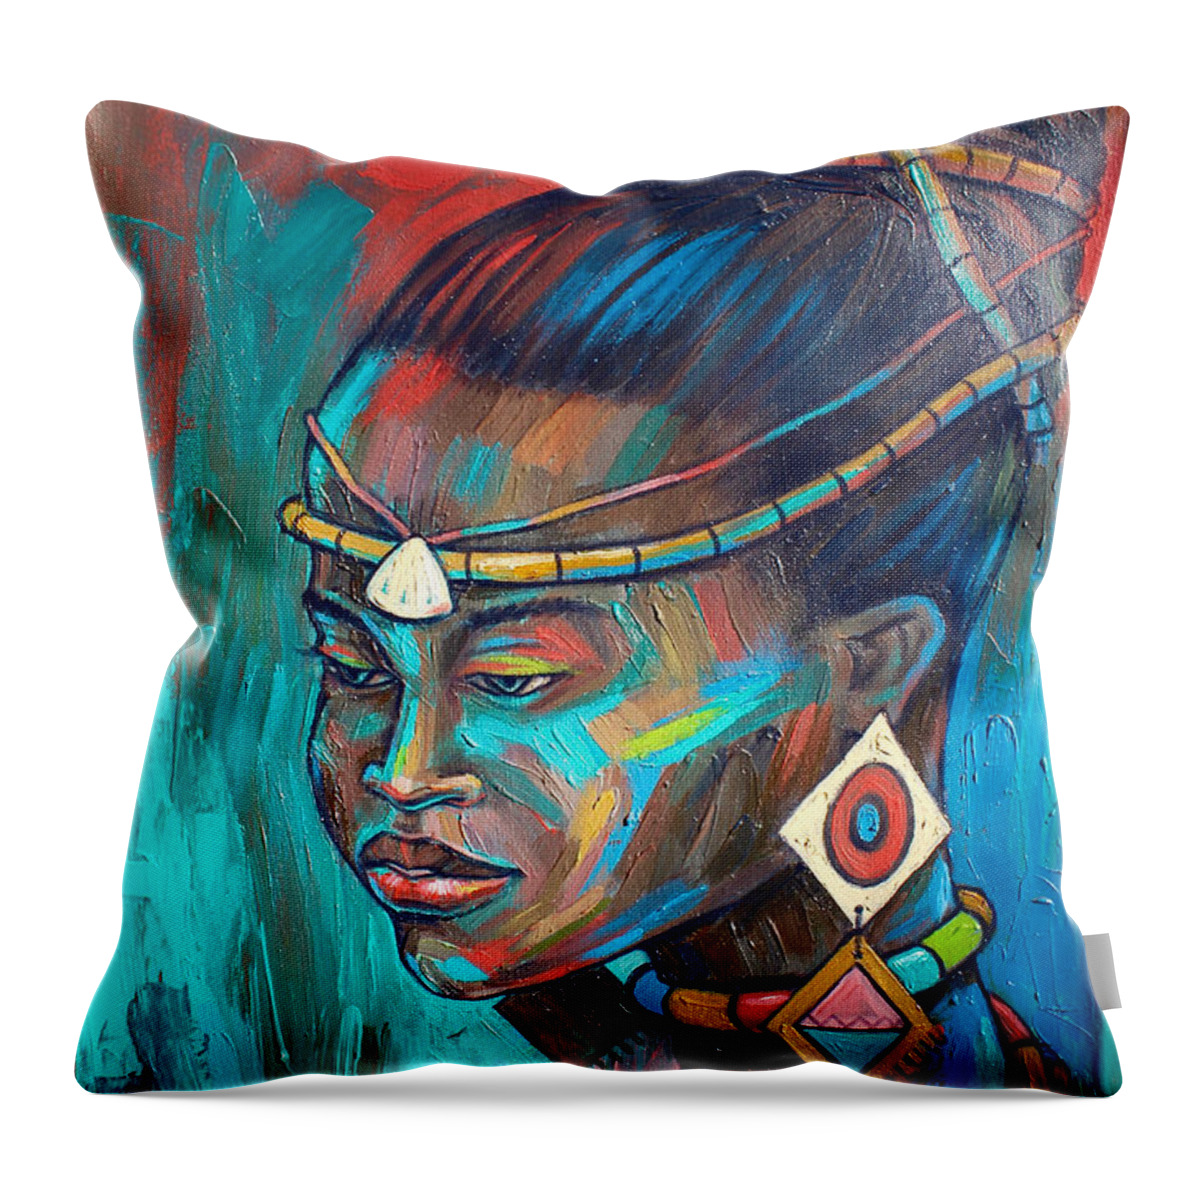 Africa Throw Pillow featuring the painting African Princess by Amakai